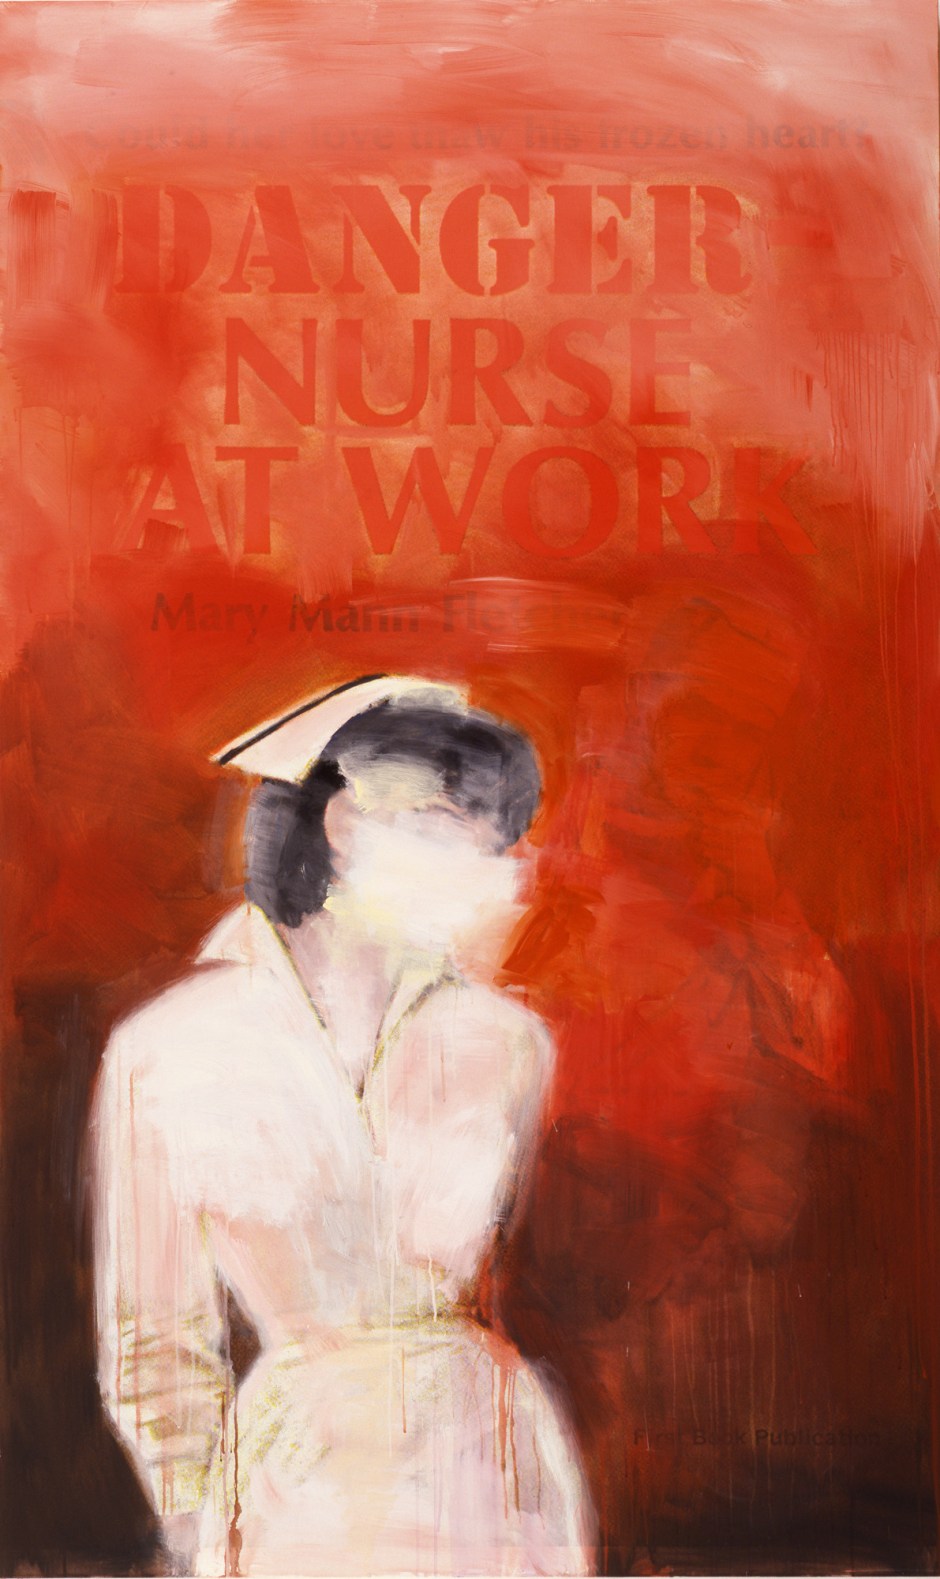 Danger Nurse at Work, 2002  signed on verso with date and title  ink jet print and acrylic on canvas  236.22 x 142.24 cm 93 x 56 in.